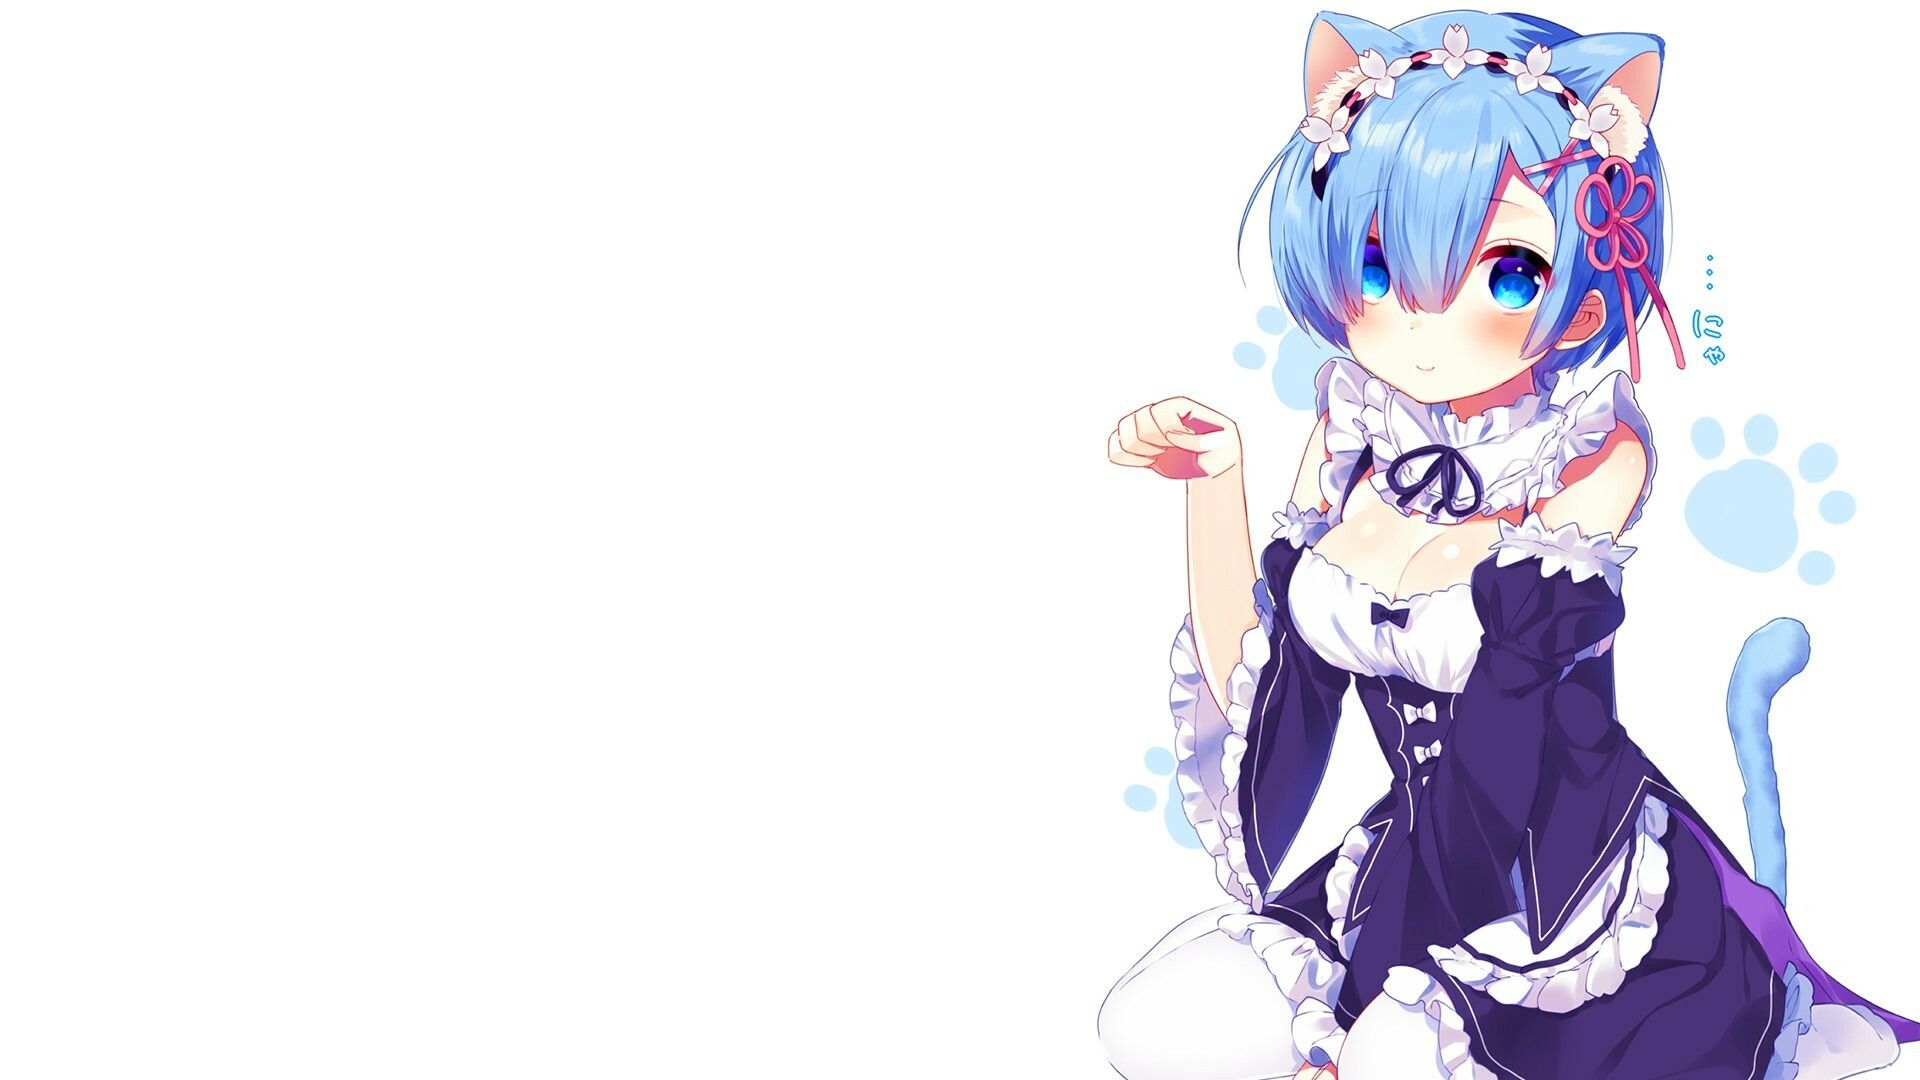 Neko Anime Wallpaper: HD, 4K, 5K for PC and Mobile. Download free image for iPhone, Android